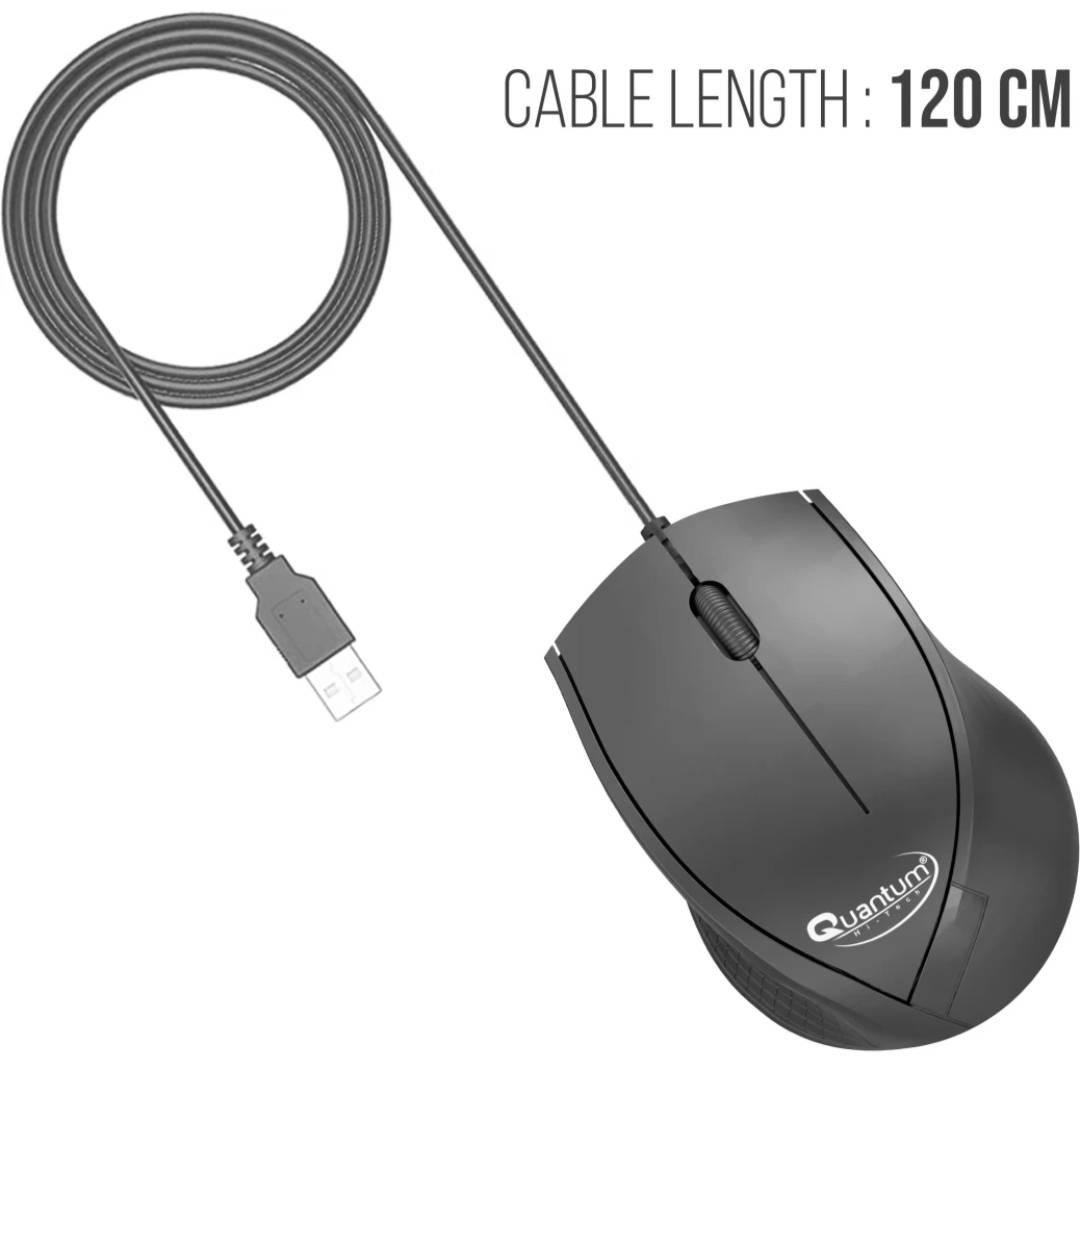 QHM251H WIRED MOUSE